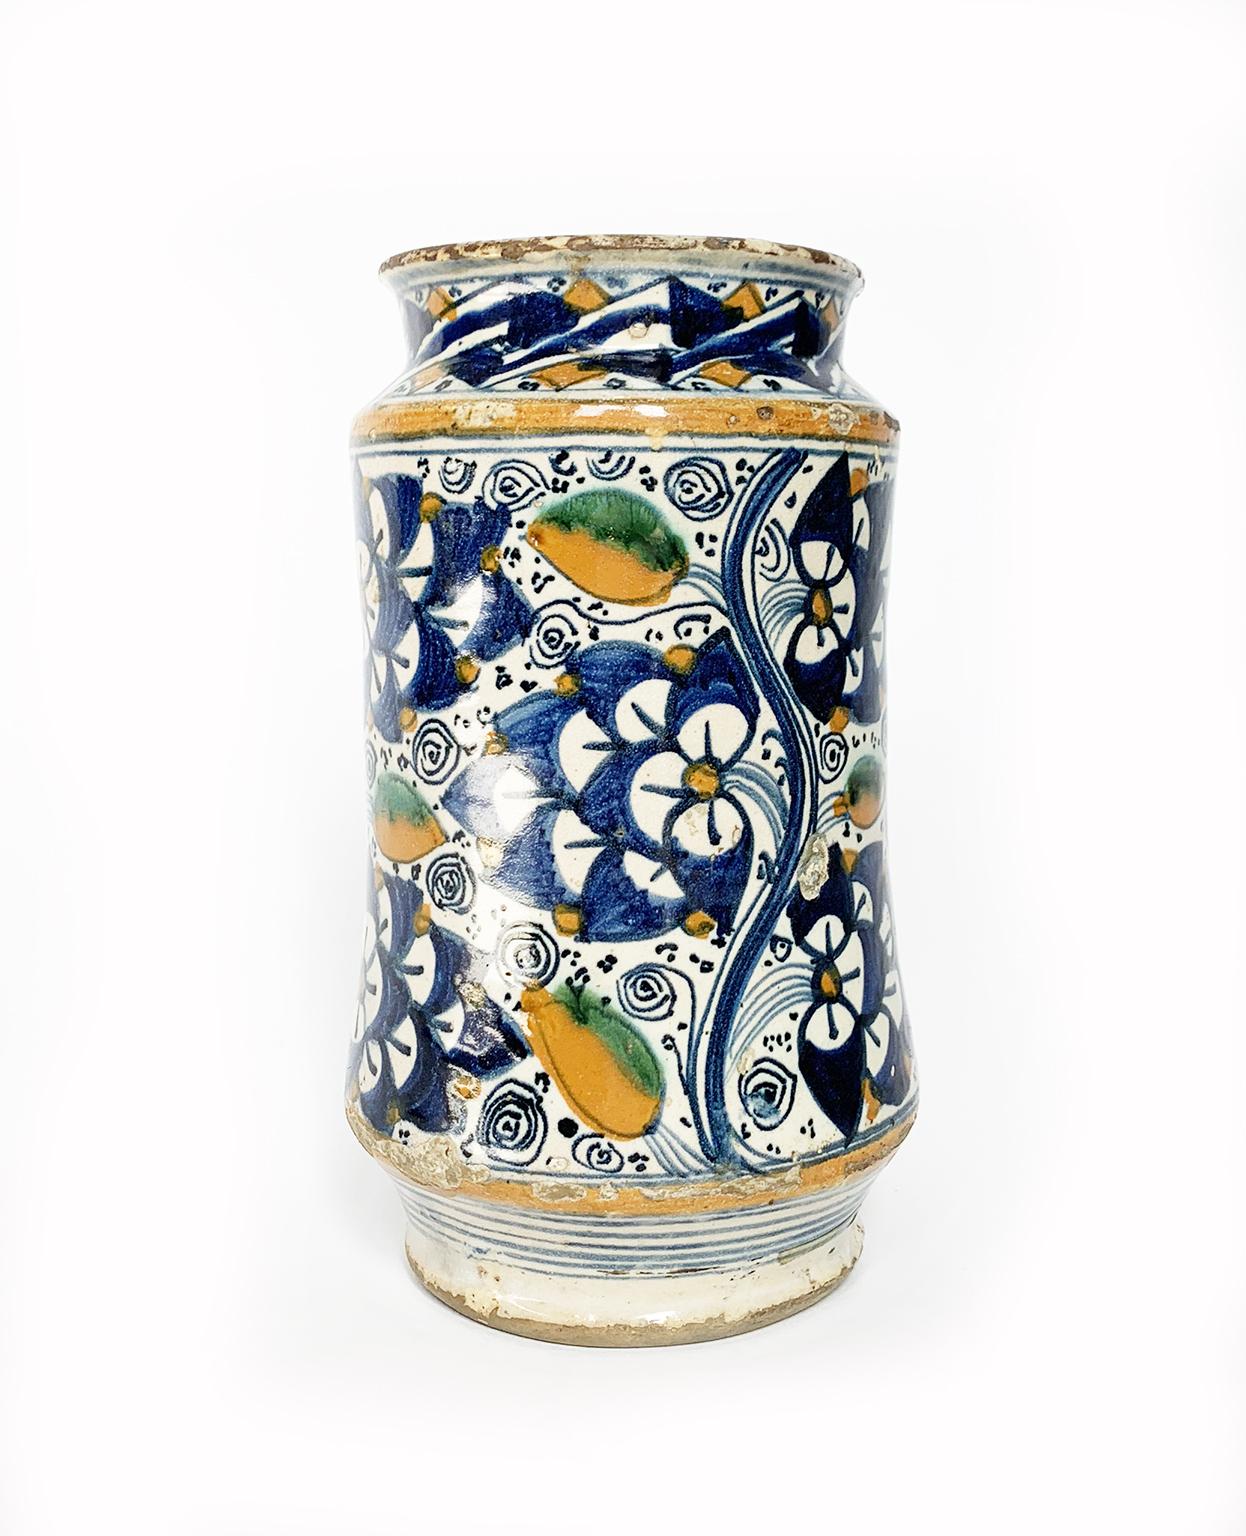 Tin-glazed earthenware drag jar (albarello)
Montelupo, 1490-1510
It measures: mouth diameter 3.54 in (9 cm), foot diameter 3.46 in (8.8 cm), height 7.48 in (19 cm)
Weight: 1.34 lb (612 g)

State of conservation: intact, signs of use on the rim